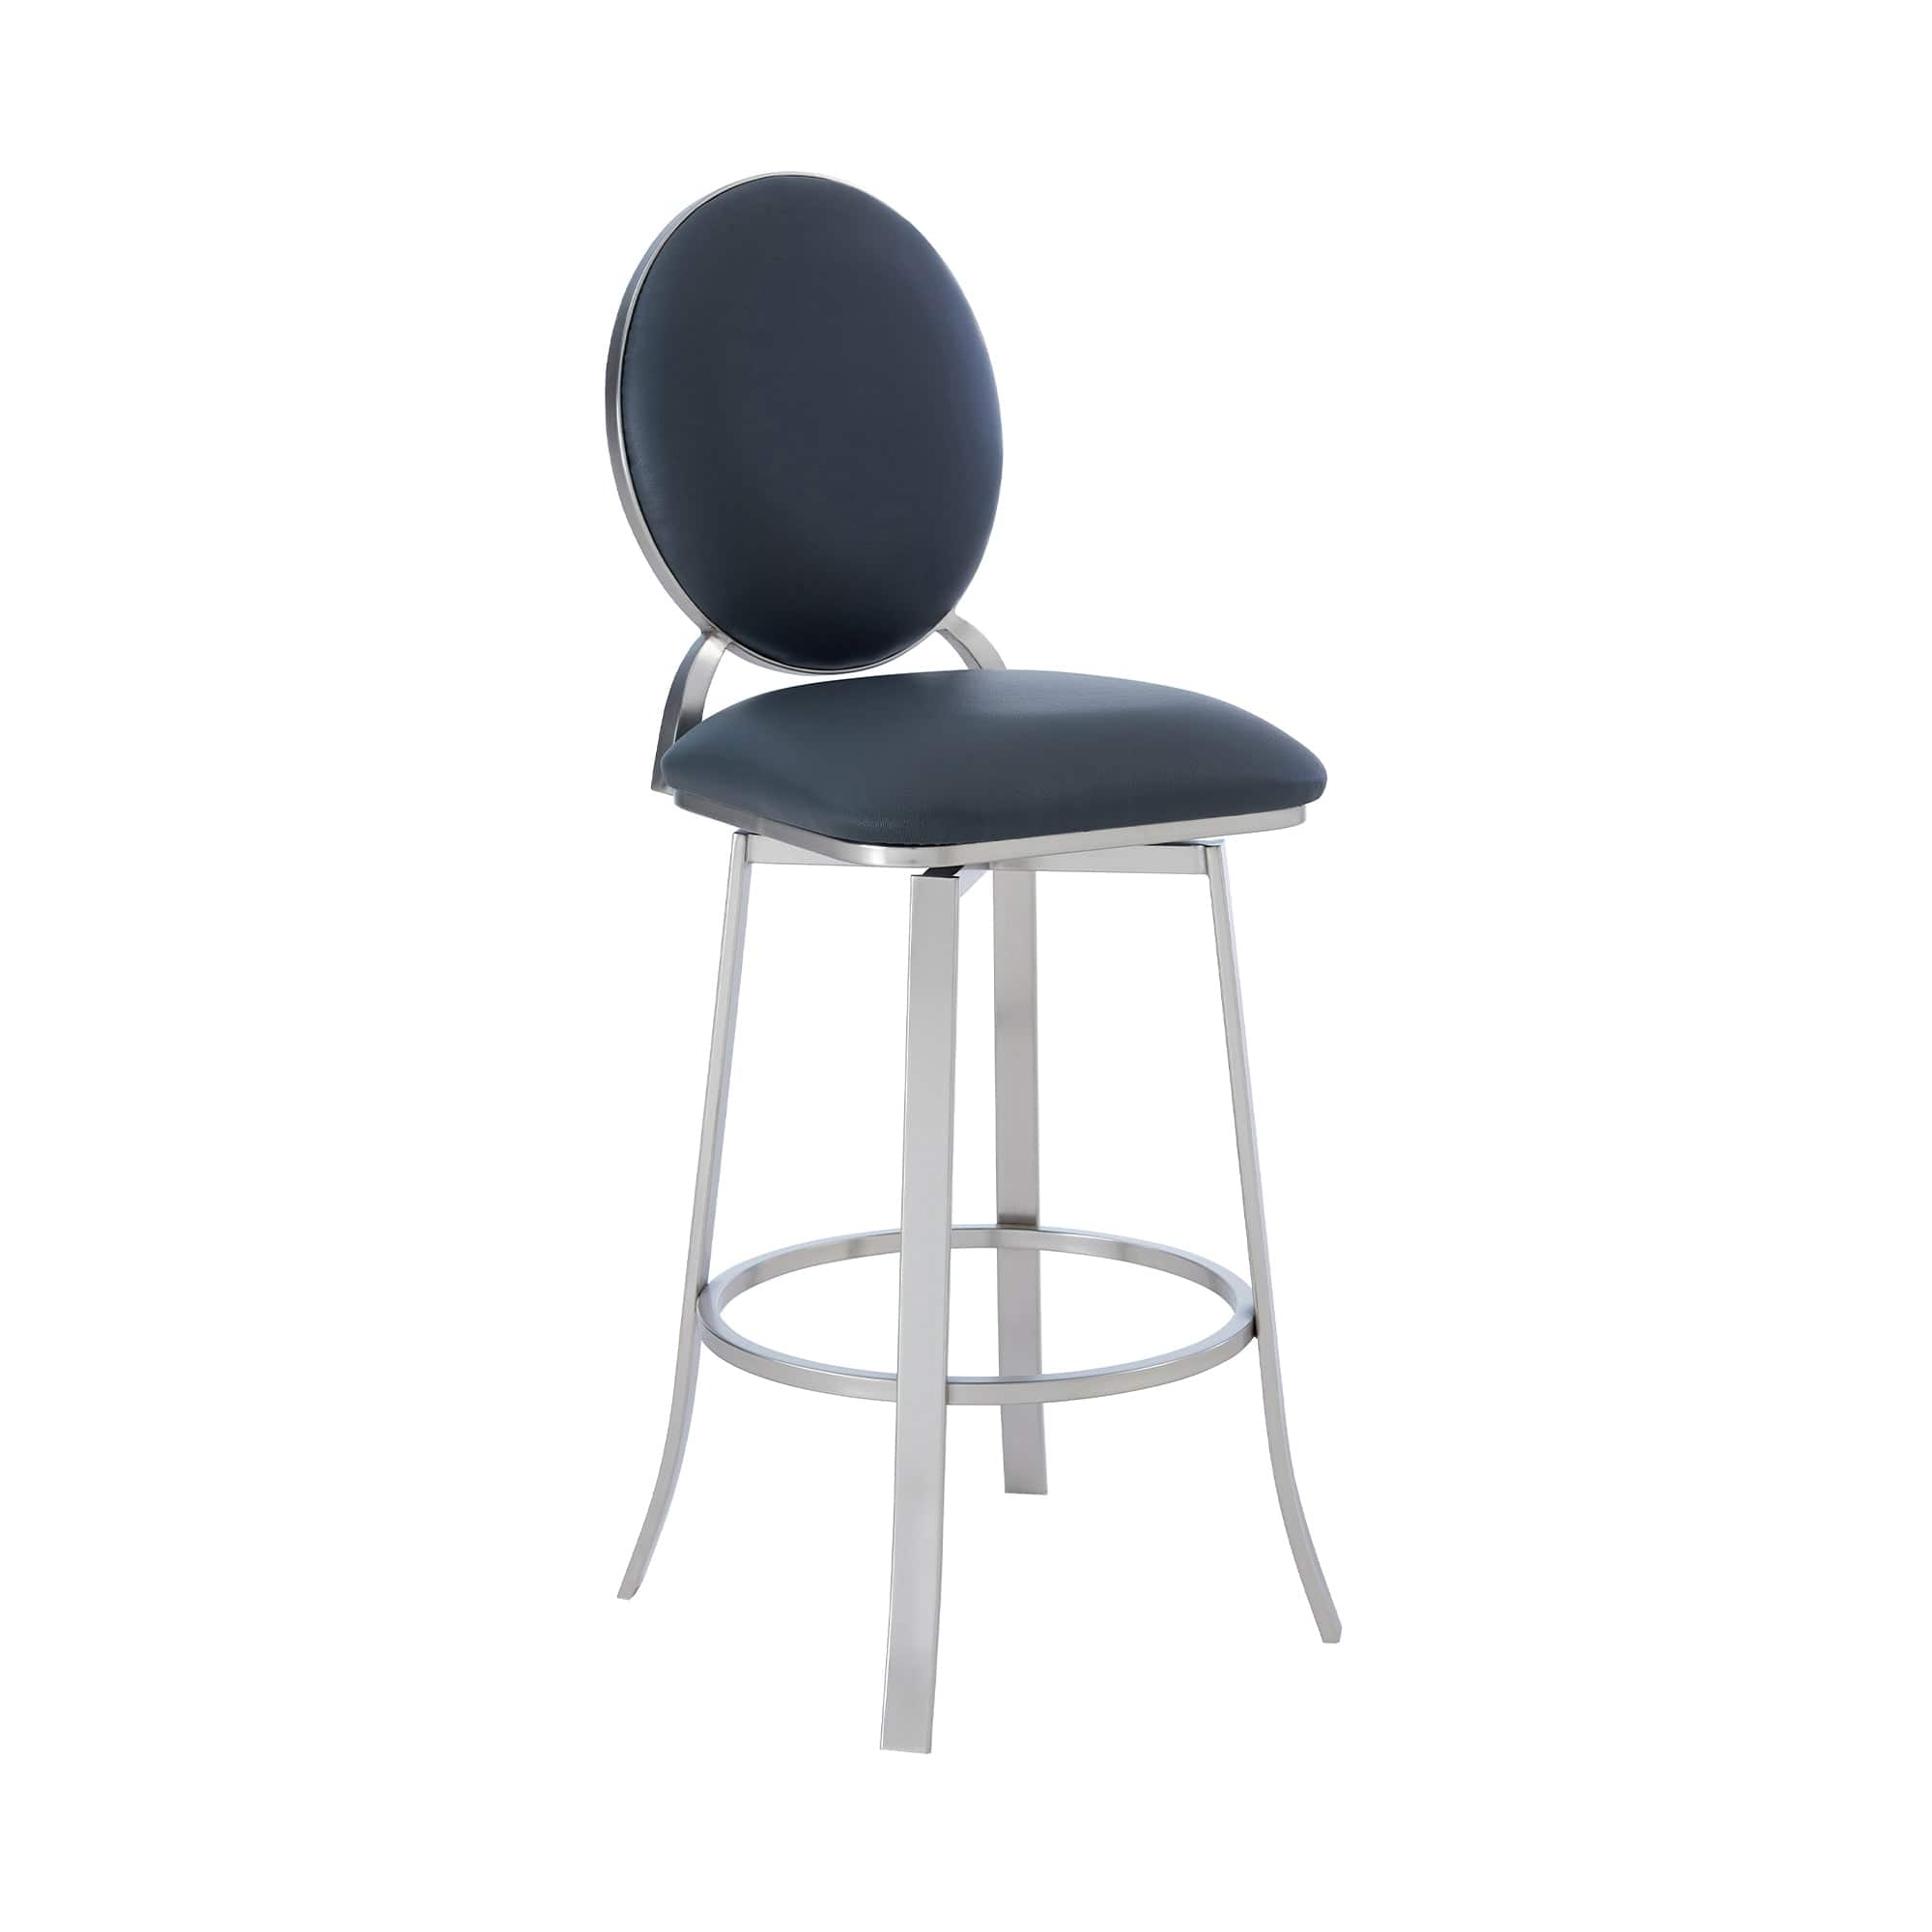 Armen Living Barstool Gray Faux Leather Armen Living - Pia Contemporary 30" Bar Height Barstool in Brushed Stainless Steel Finish and Gray Faux Leather | LCPABABSGR30